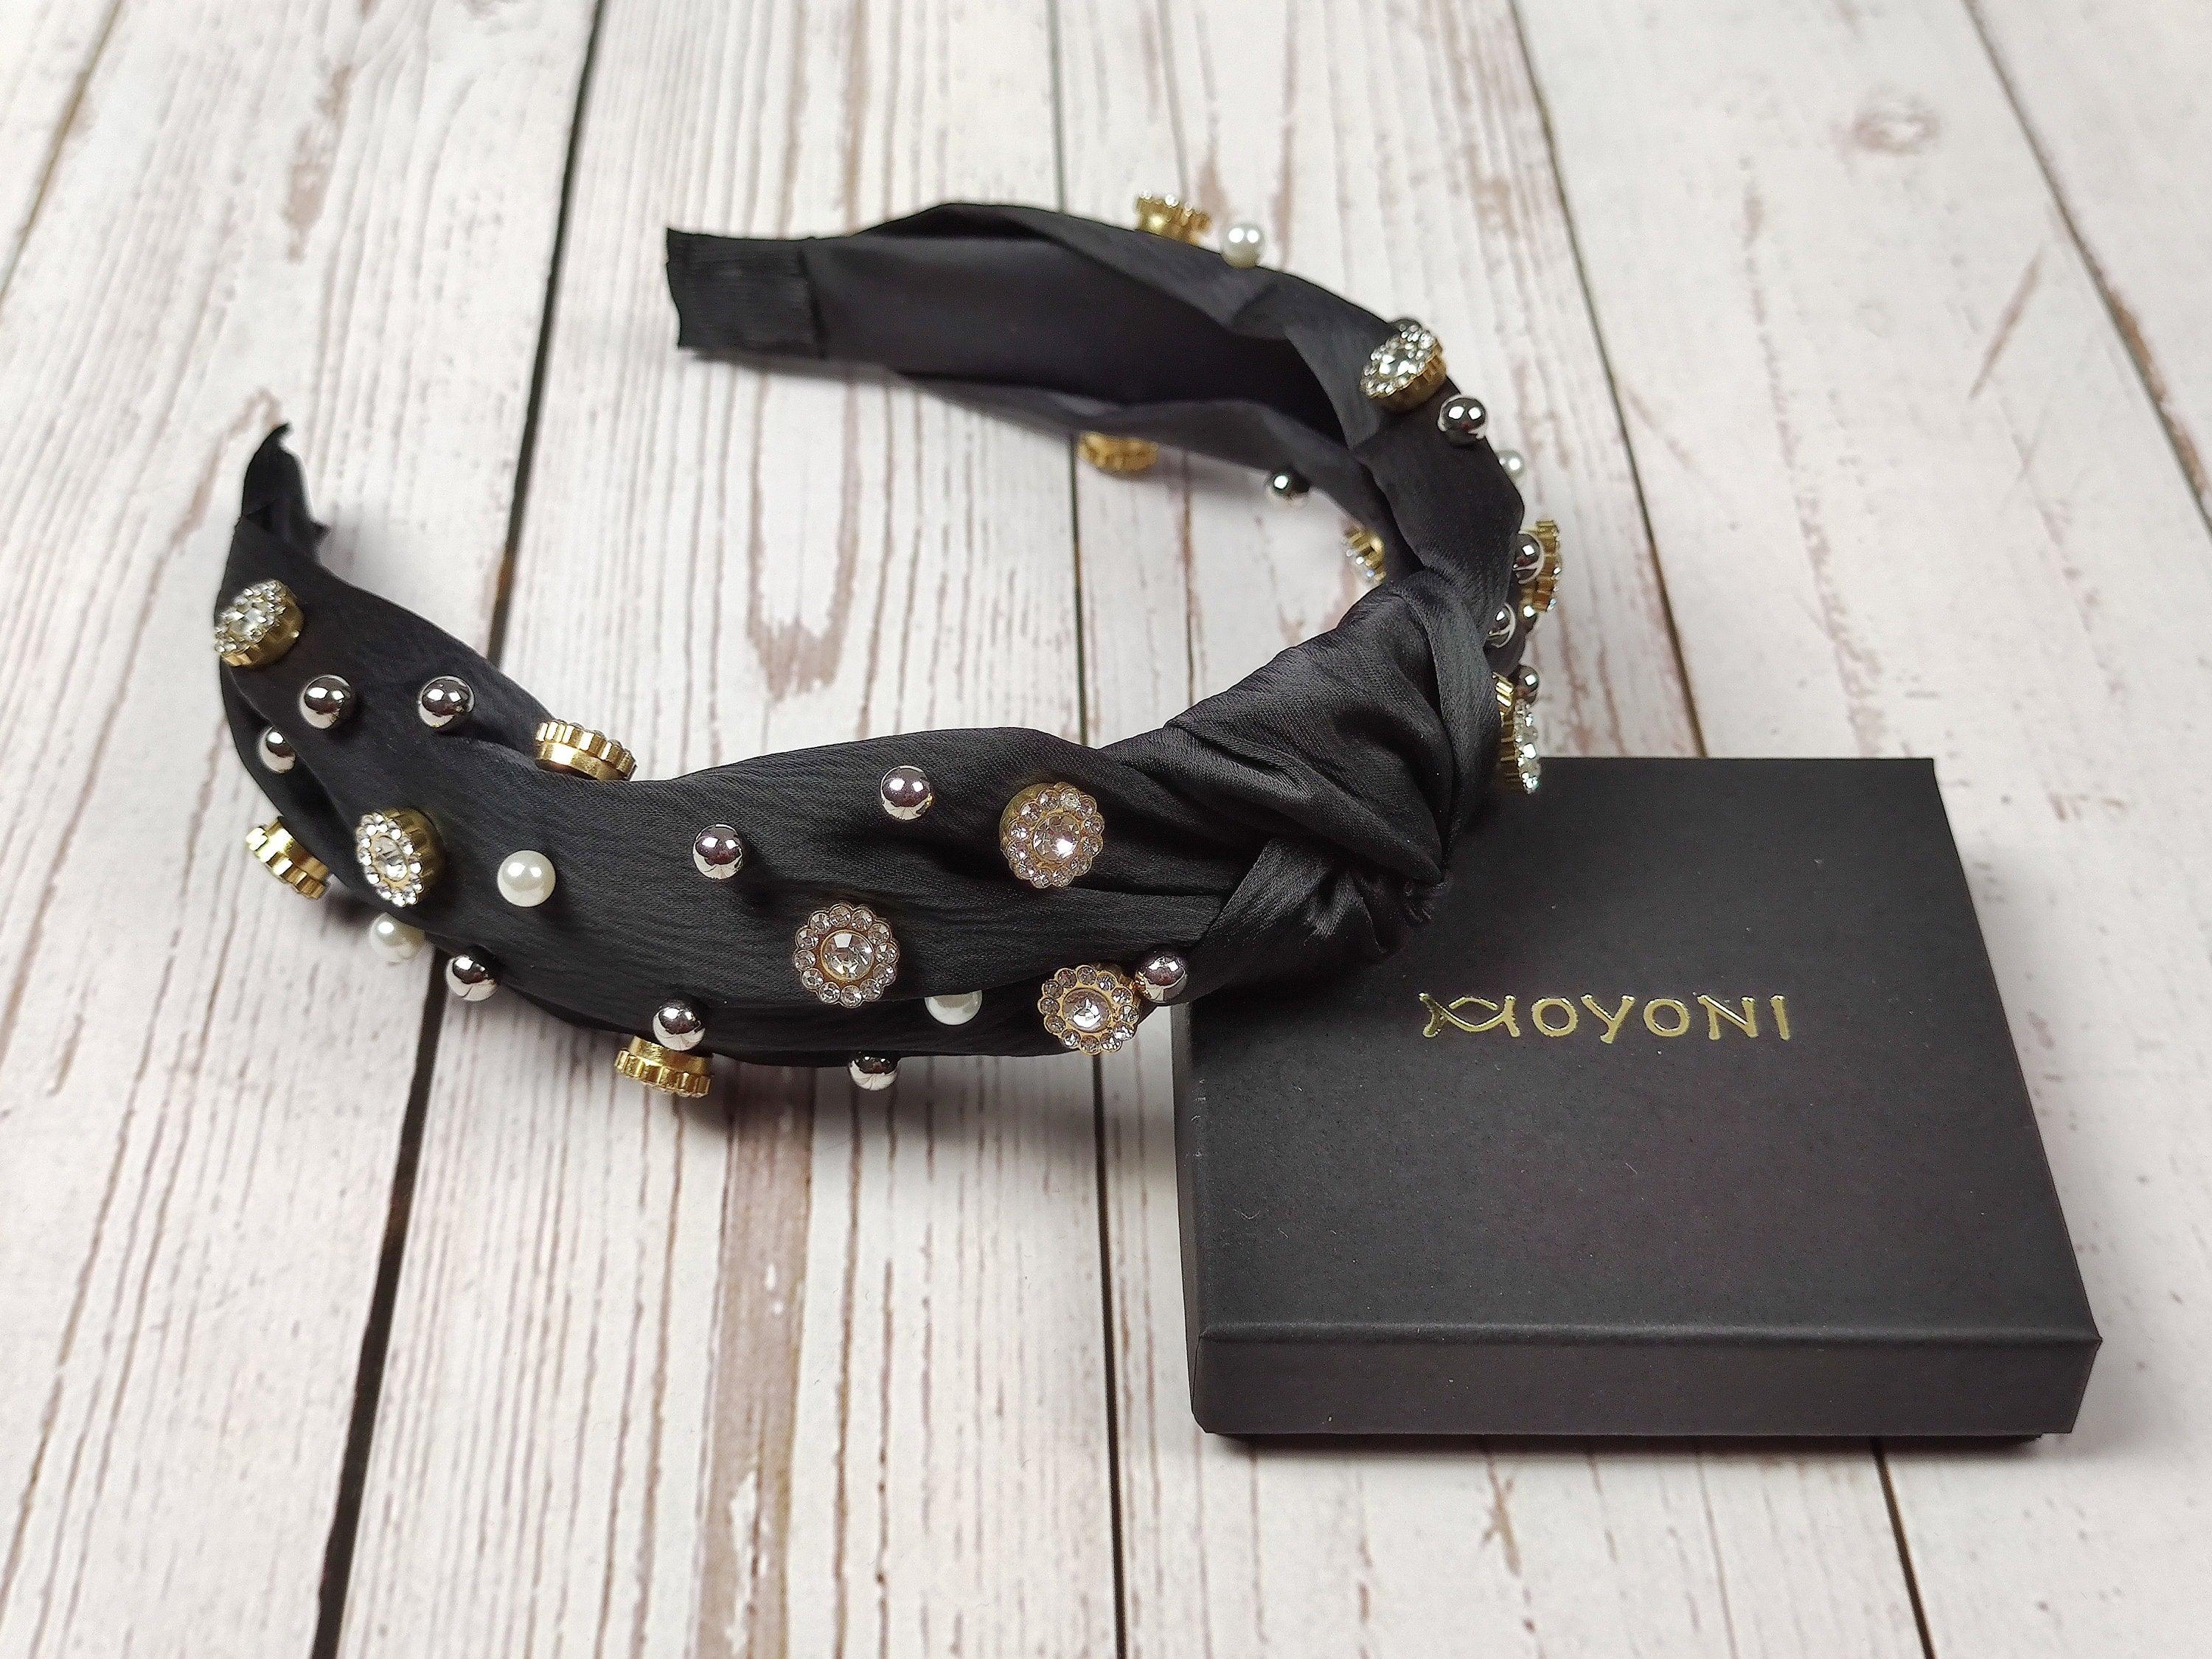 Delicate Boho Chic Black Satin Headband with Gemstone and Pearl Accent - Handmade Knot Design without Padding available at Moyoni Design